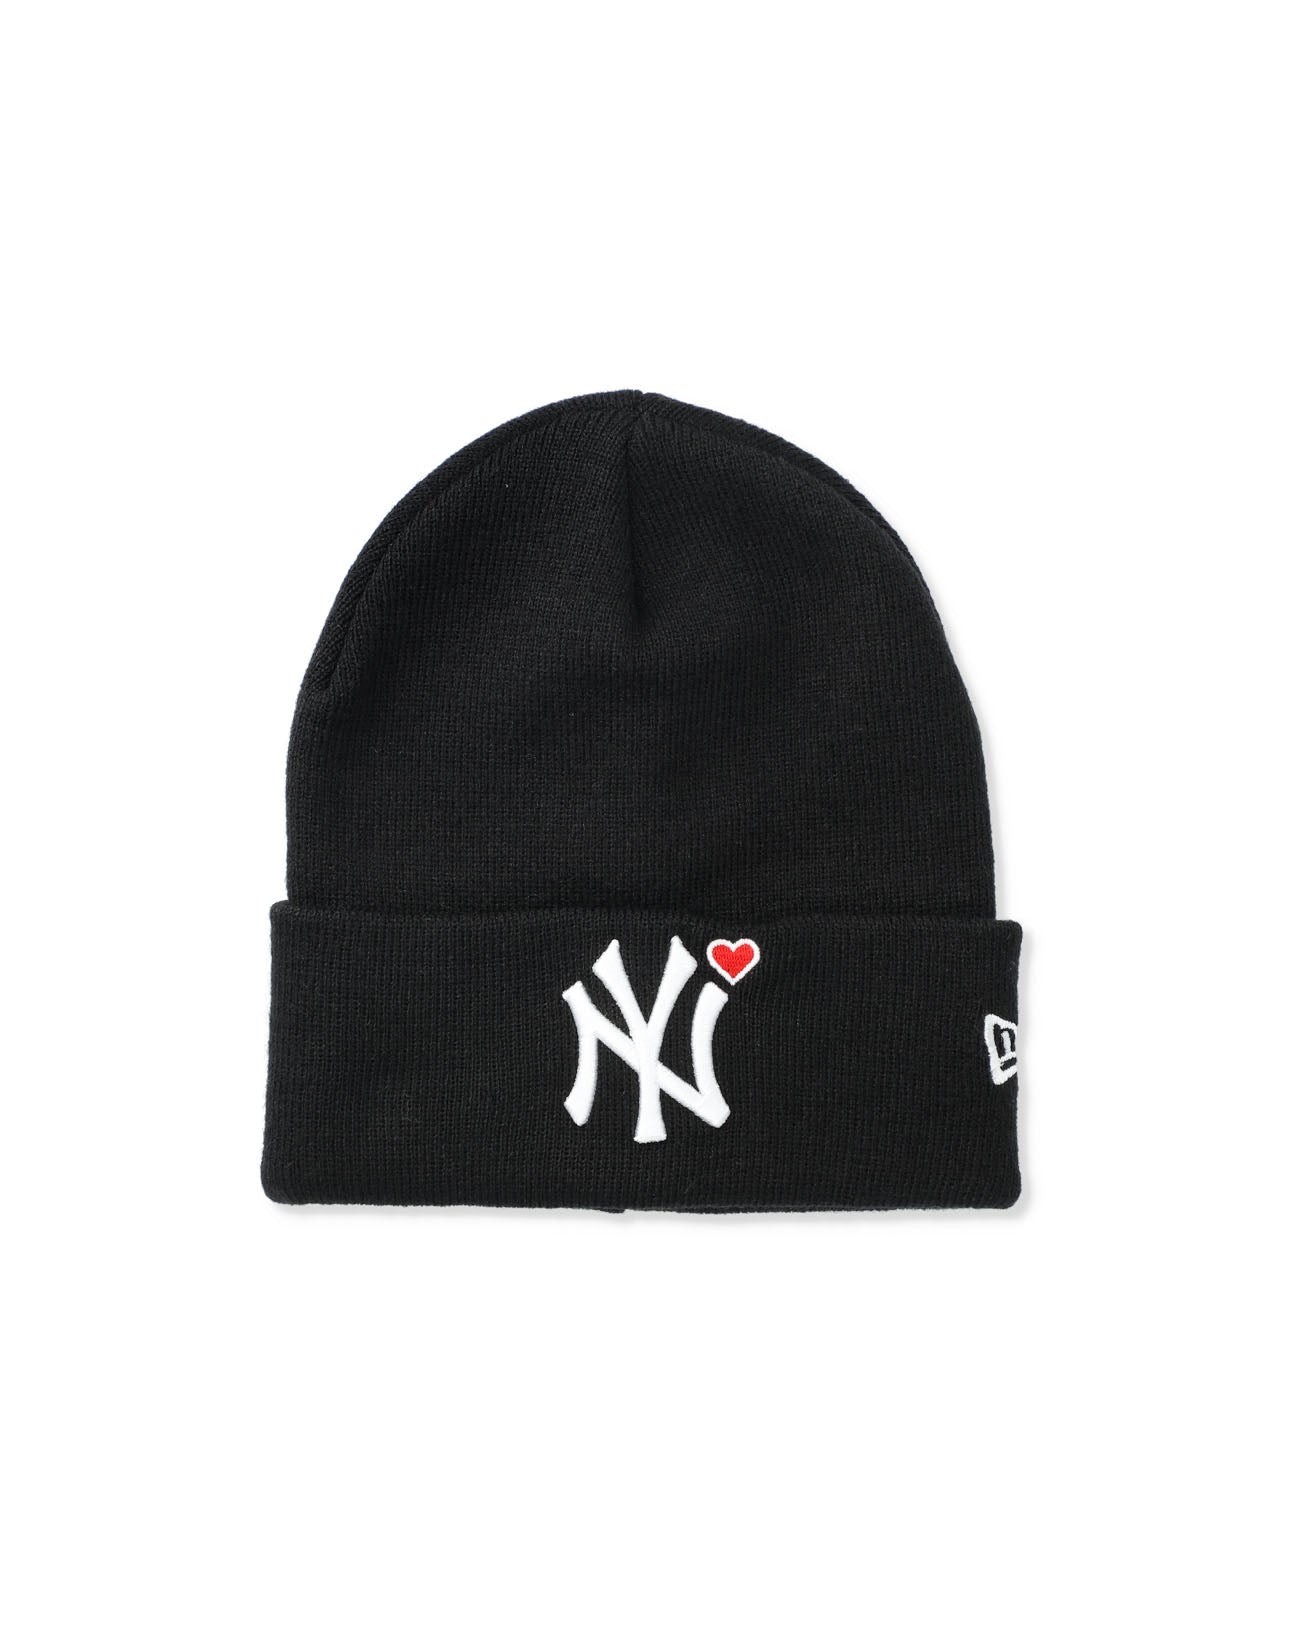 Yankees "RED" Heart Embroidery Knit Cap - black×red